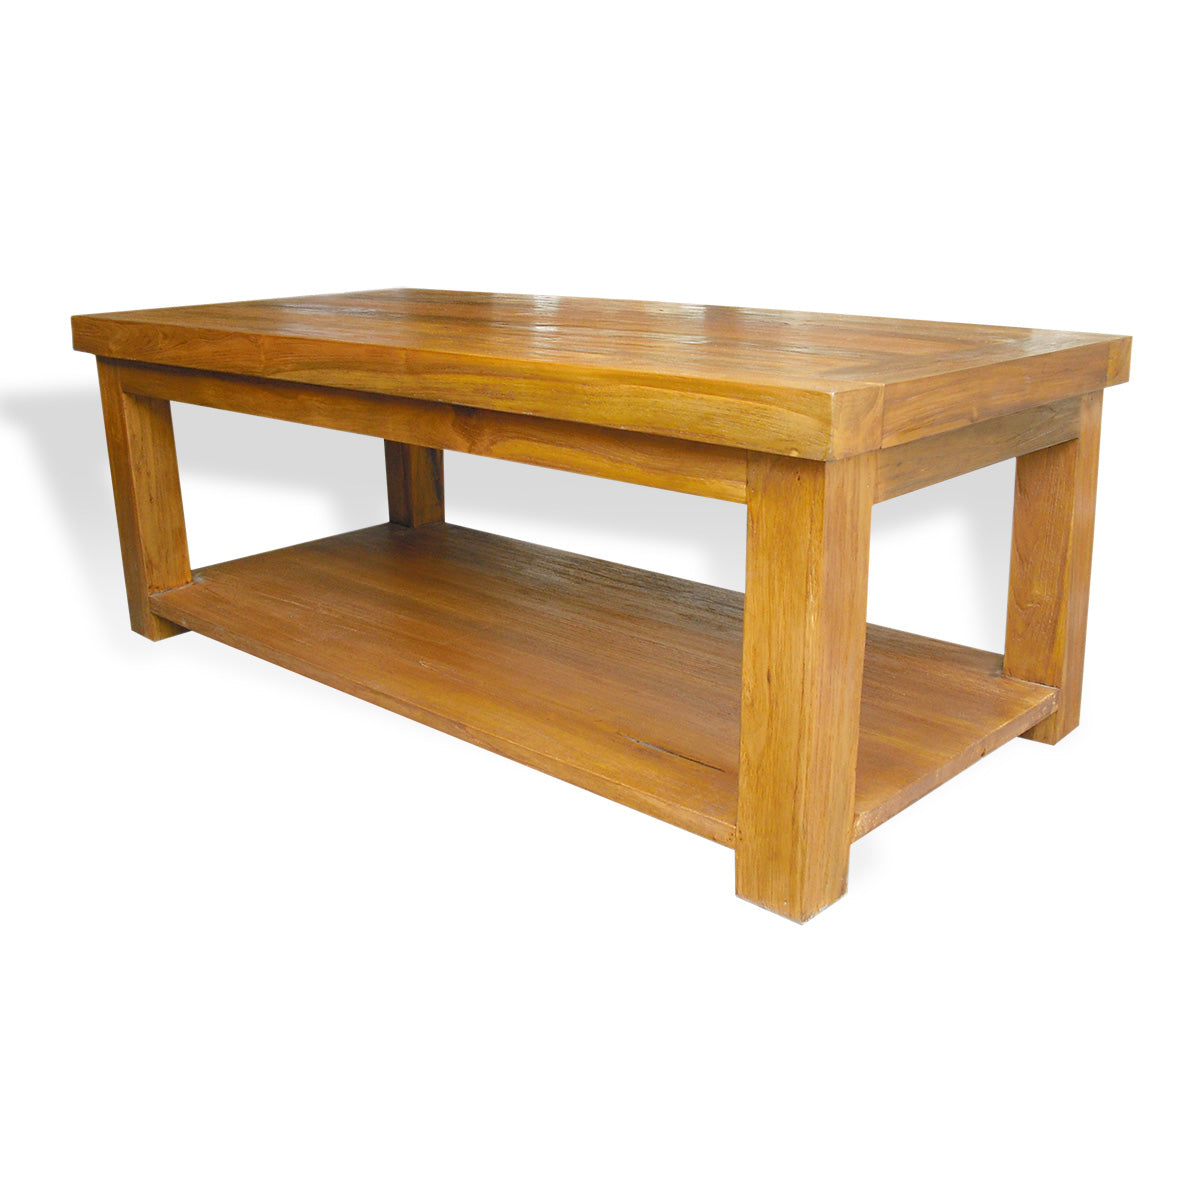 Kyt Spsb002 Natural Recycled Teak Wood Coffee Table With Shelf Sourcing Asia